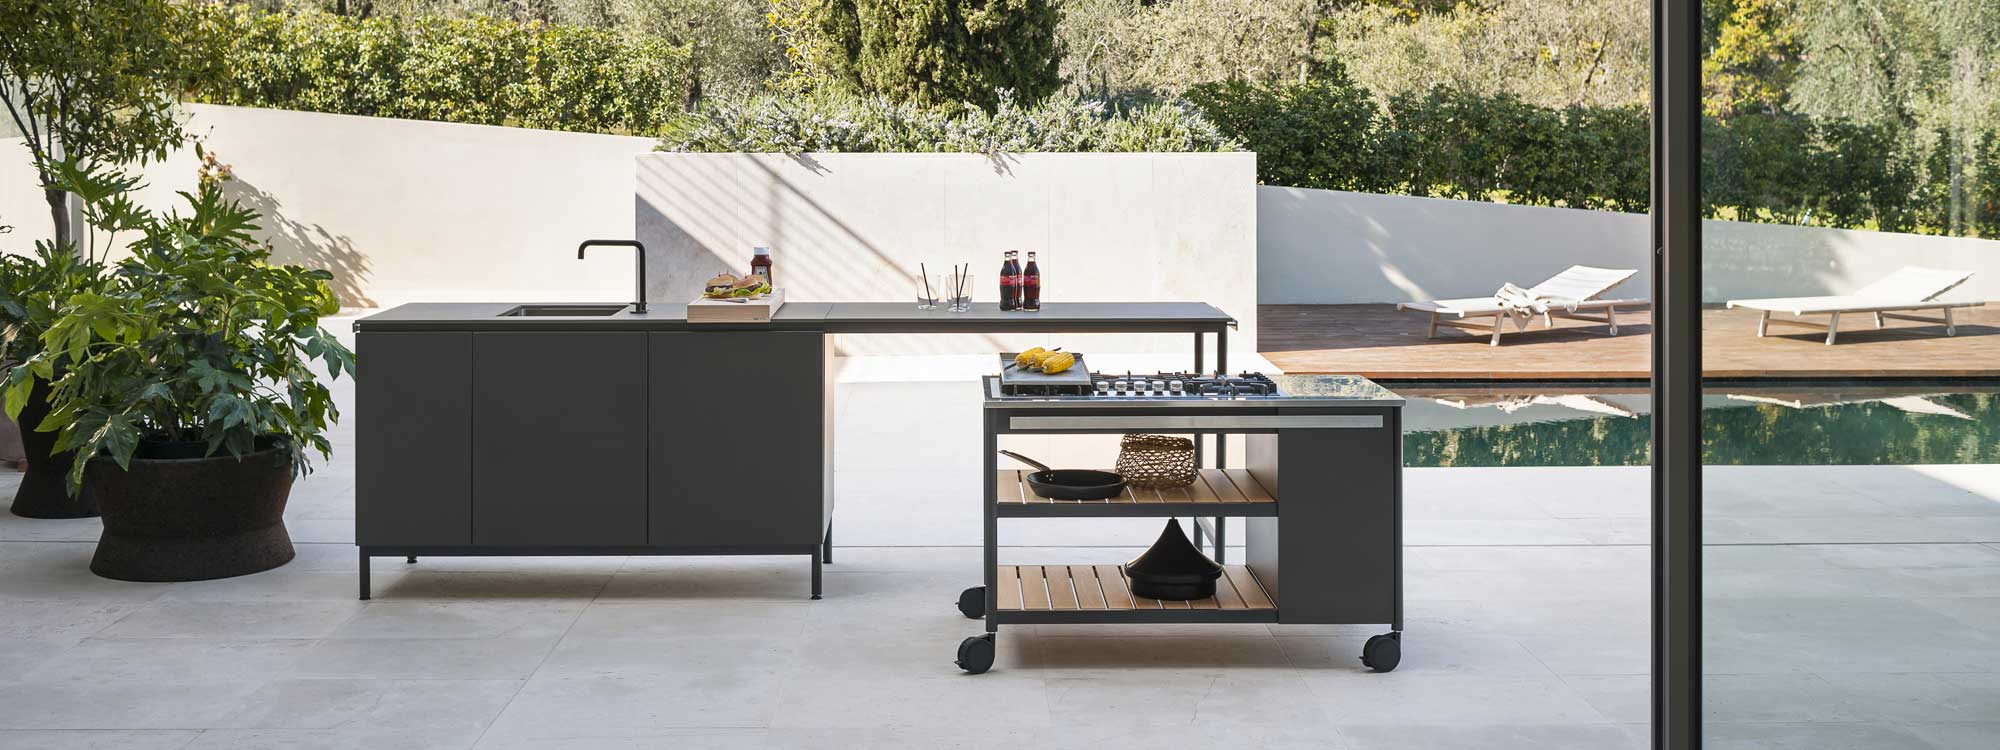 Image of RODA's Norma modern outdoor kitchen and gas bbq with Bush On cork planter to the side and Orson teak sun loungers in background next to swimming pool